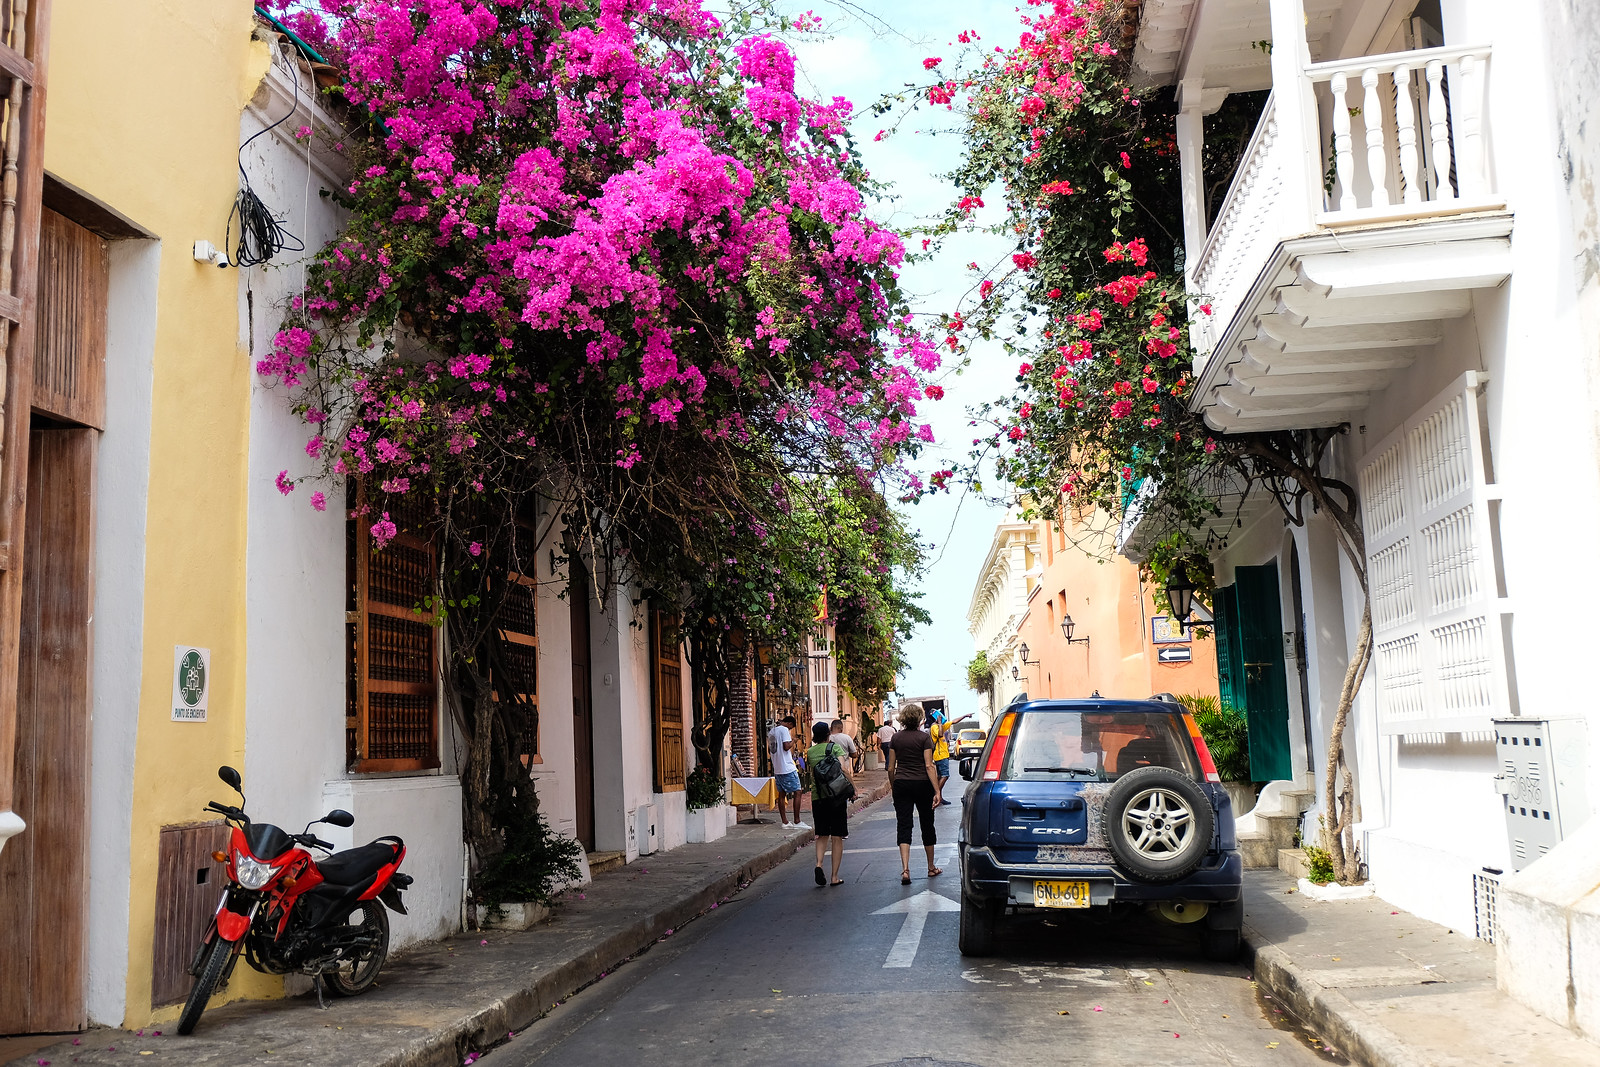 Old Town / Cartagena, Colombia